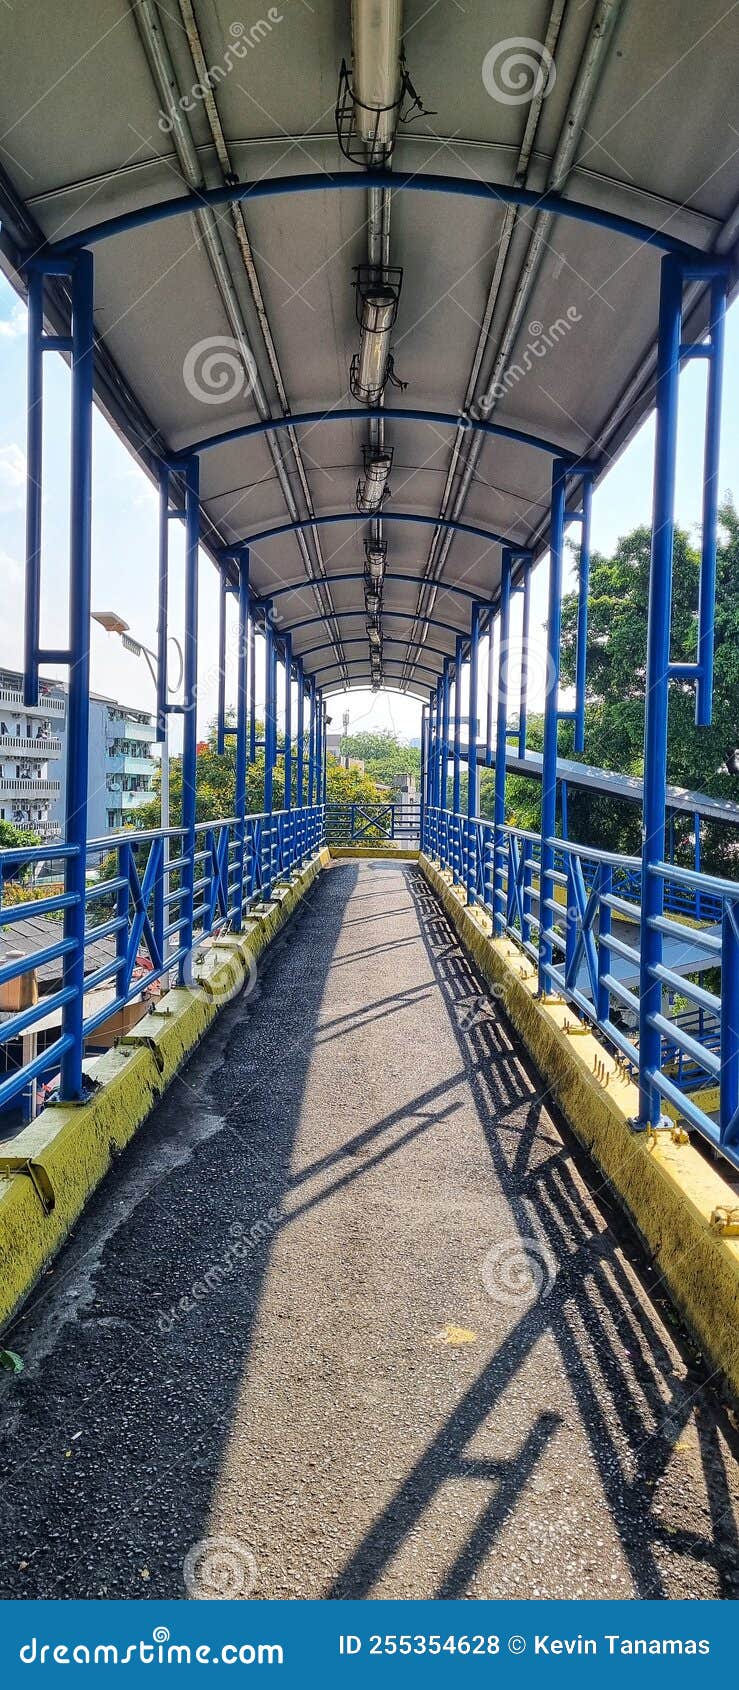 the pedestrian bridge that connects the untar 1 and 2 campuses which are often used by students and college students.